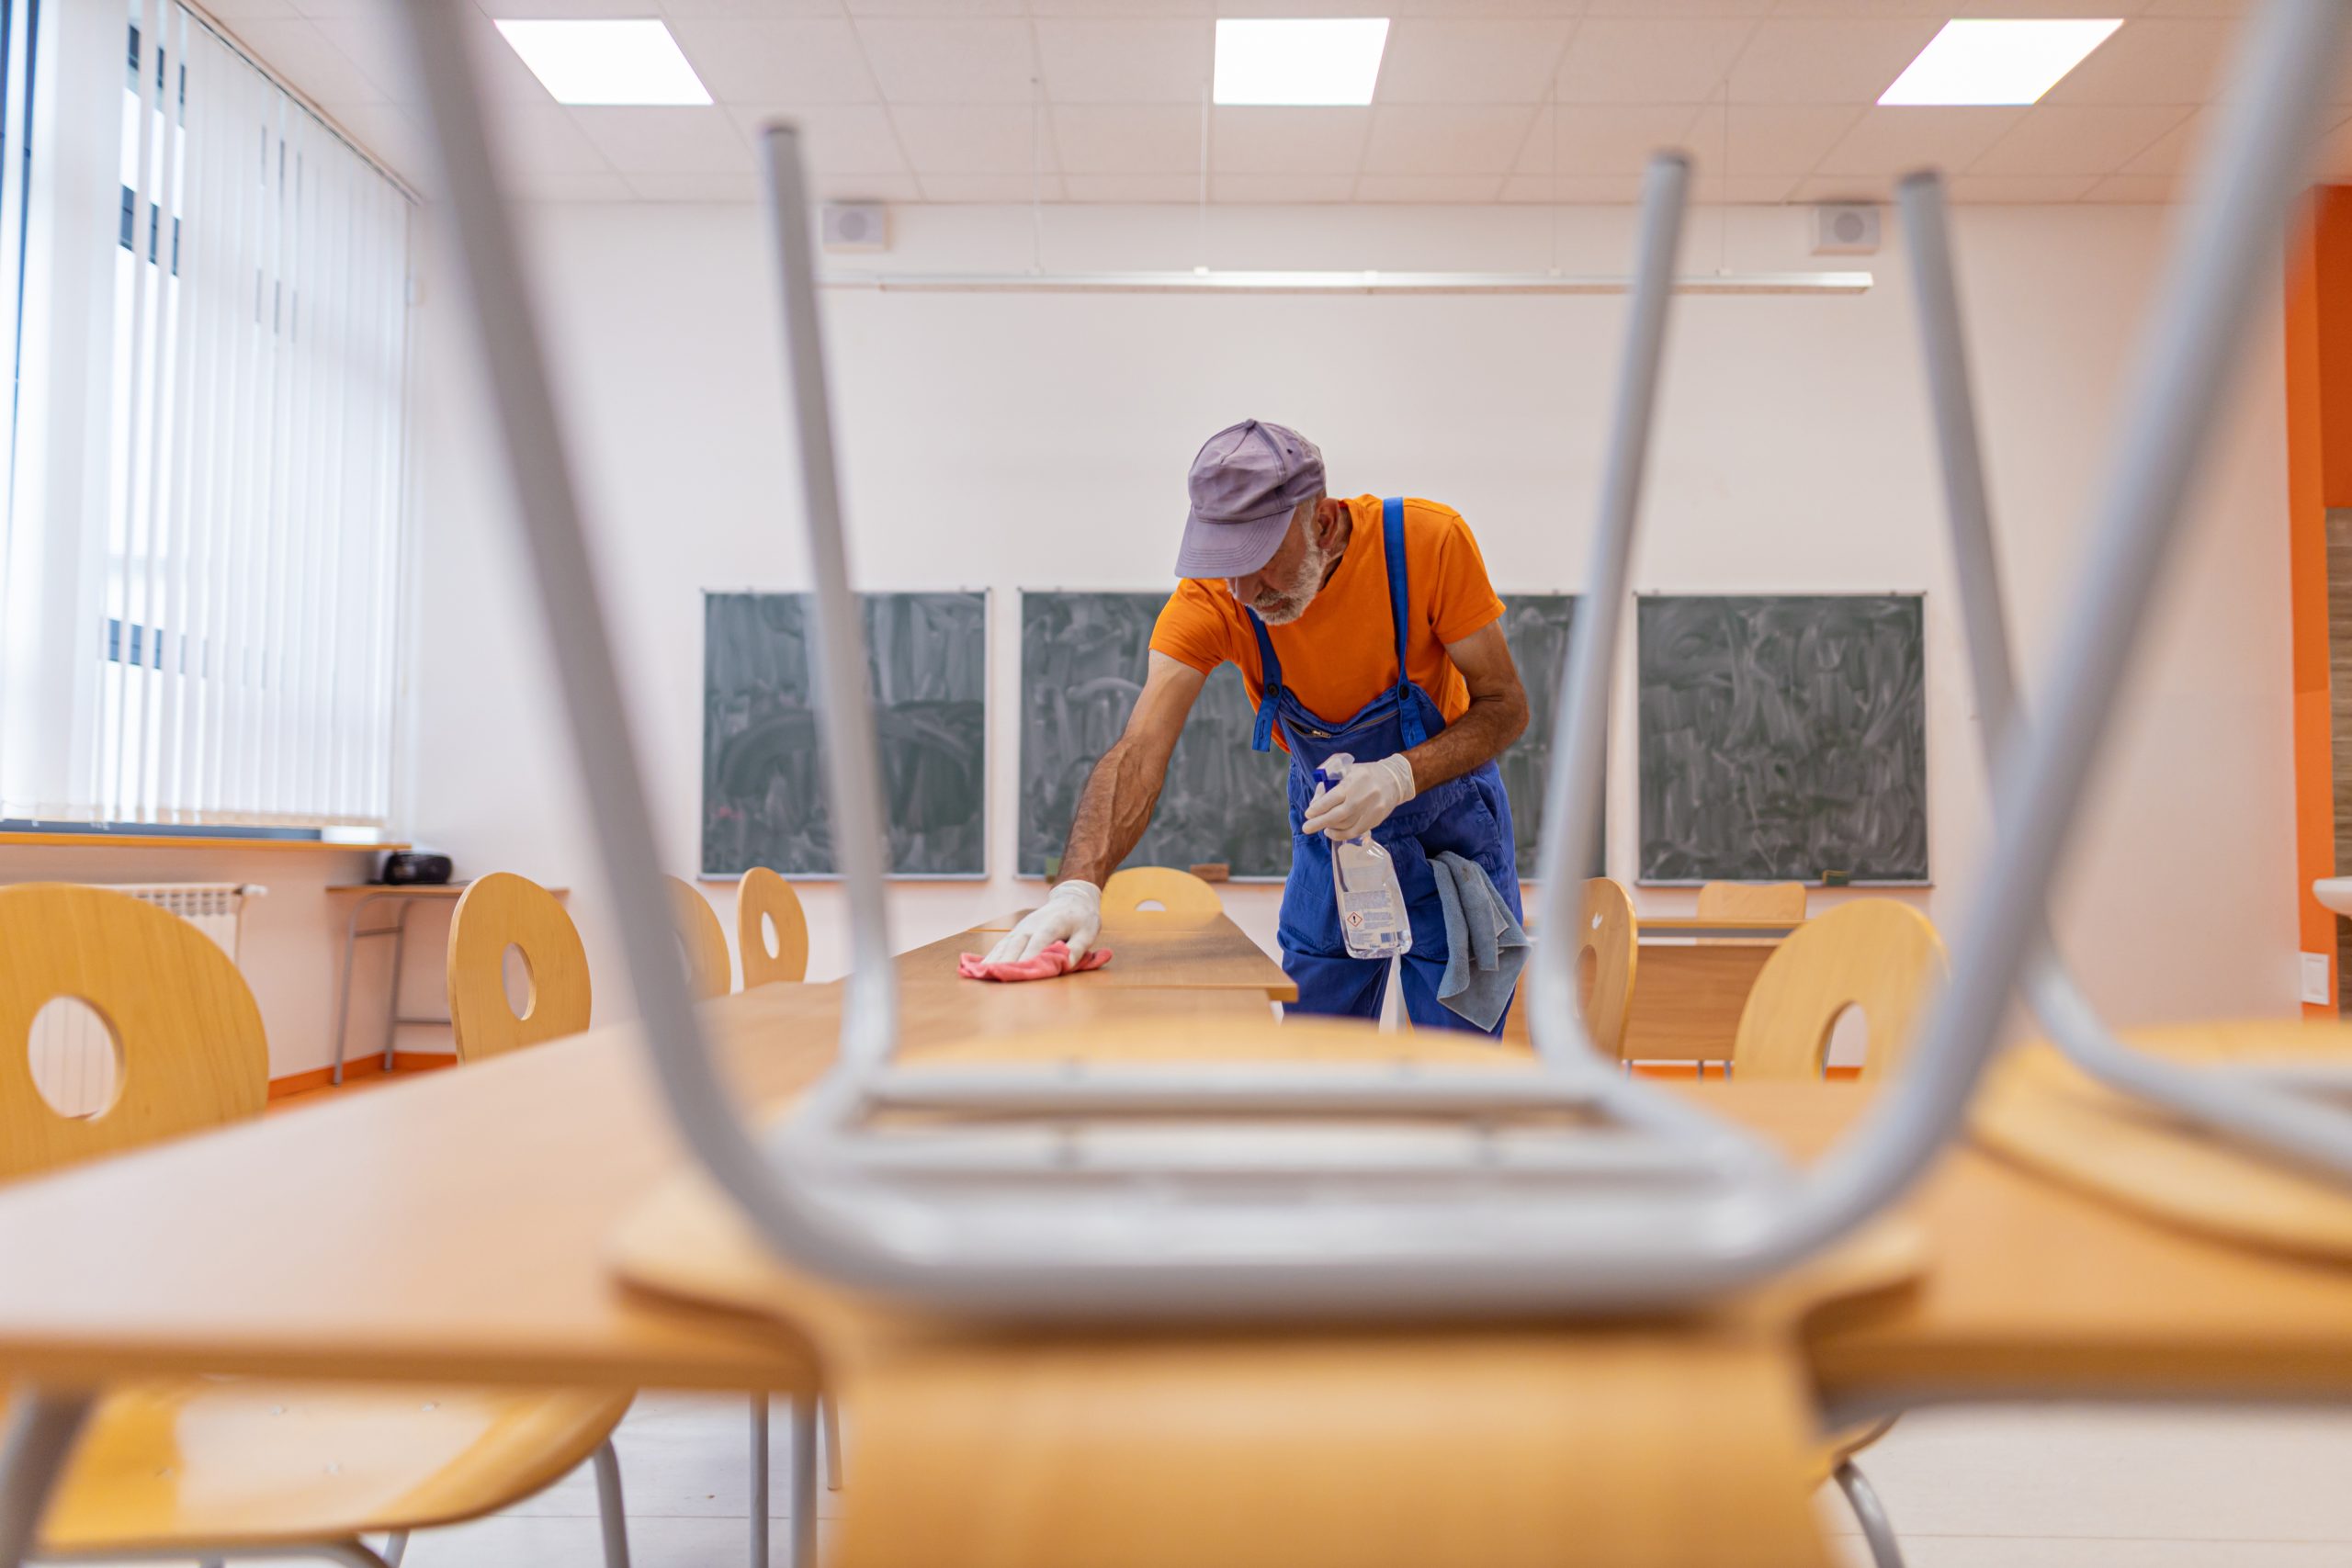 The janitor wipes the desk in the classroom